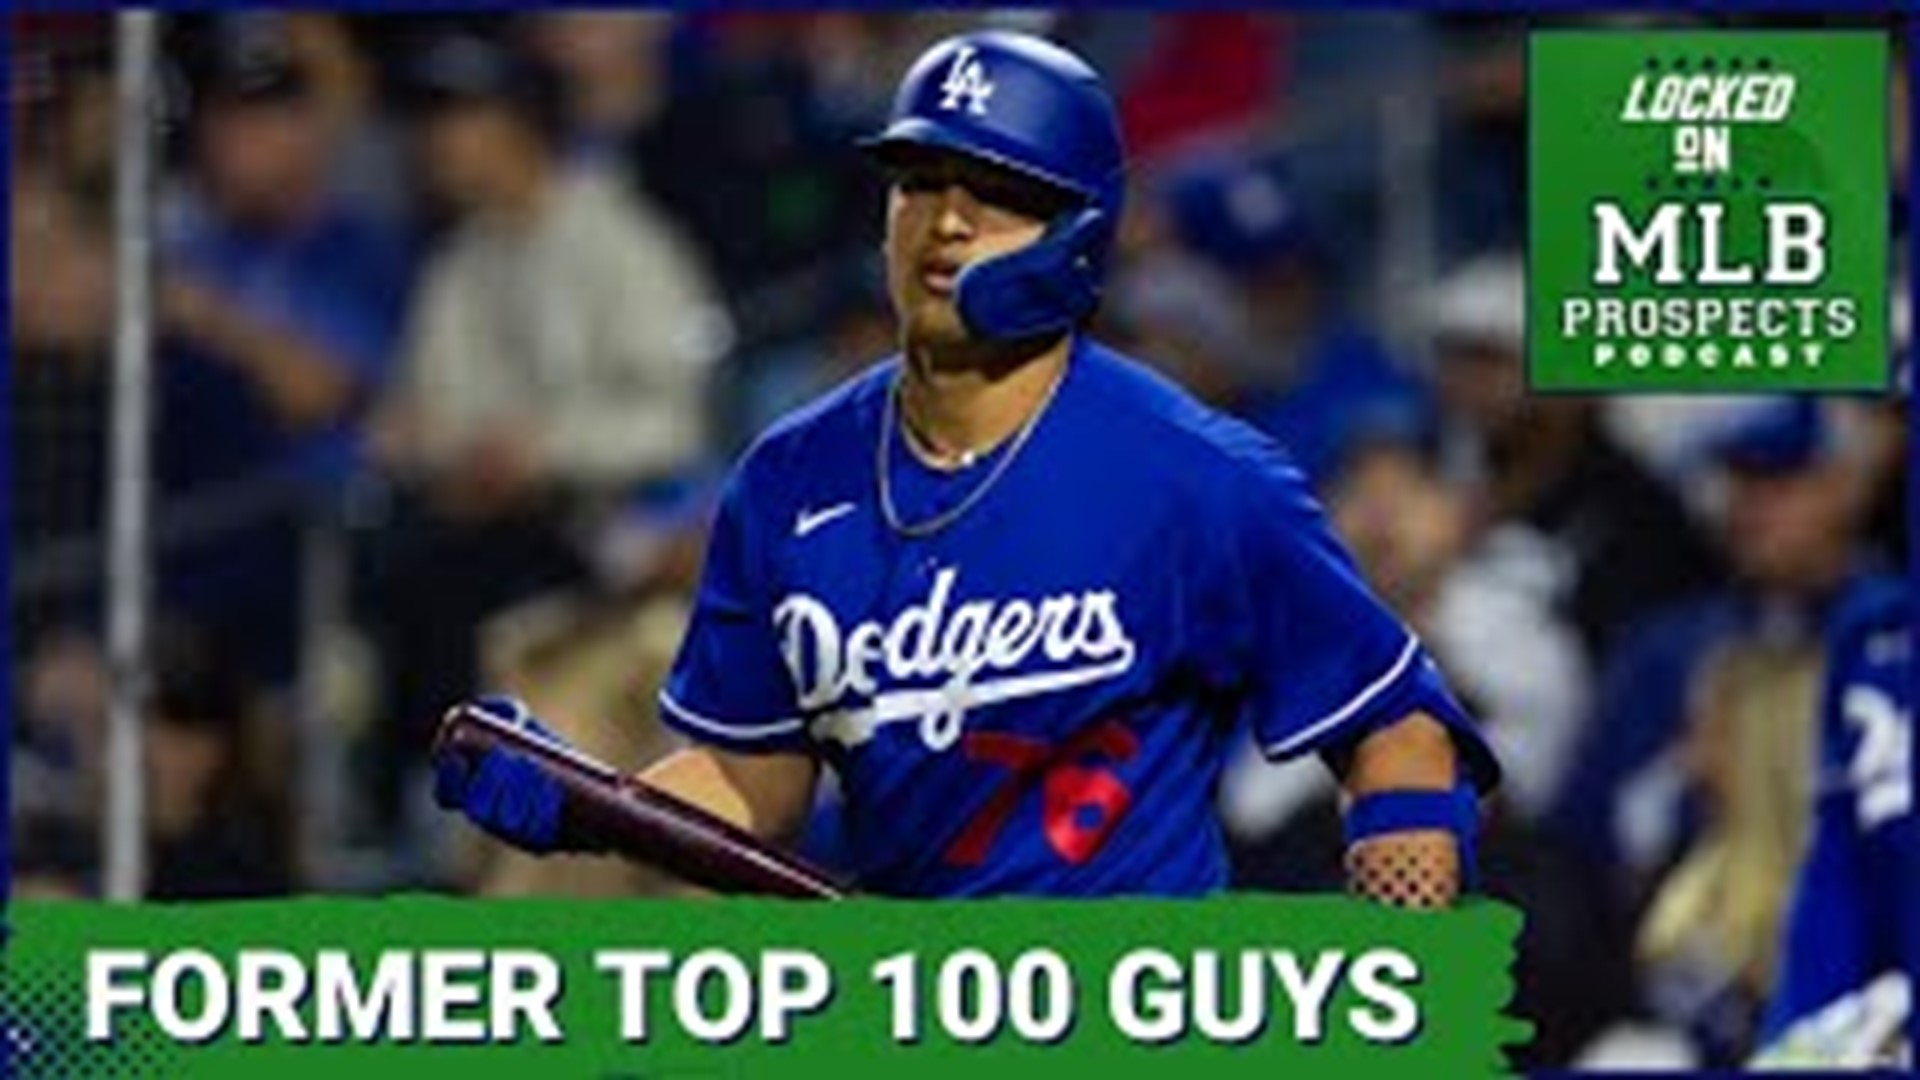 This episode of Locked On MLB Prospects podcast discusses the players that made it to the Top 100 lists last year but didn't make it this year.